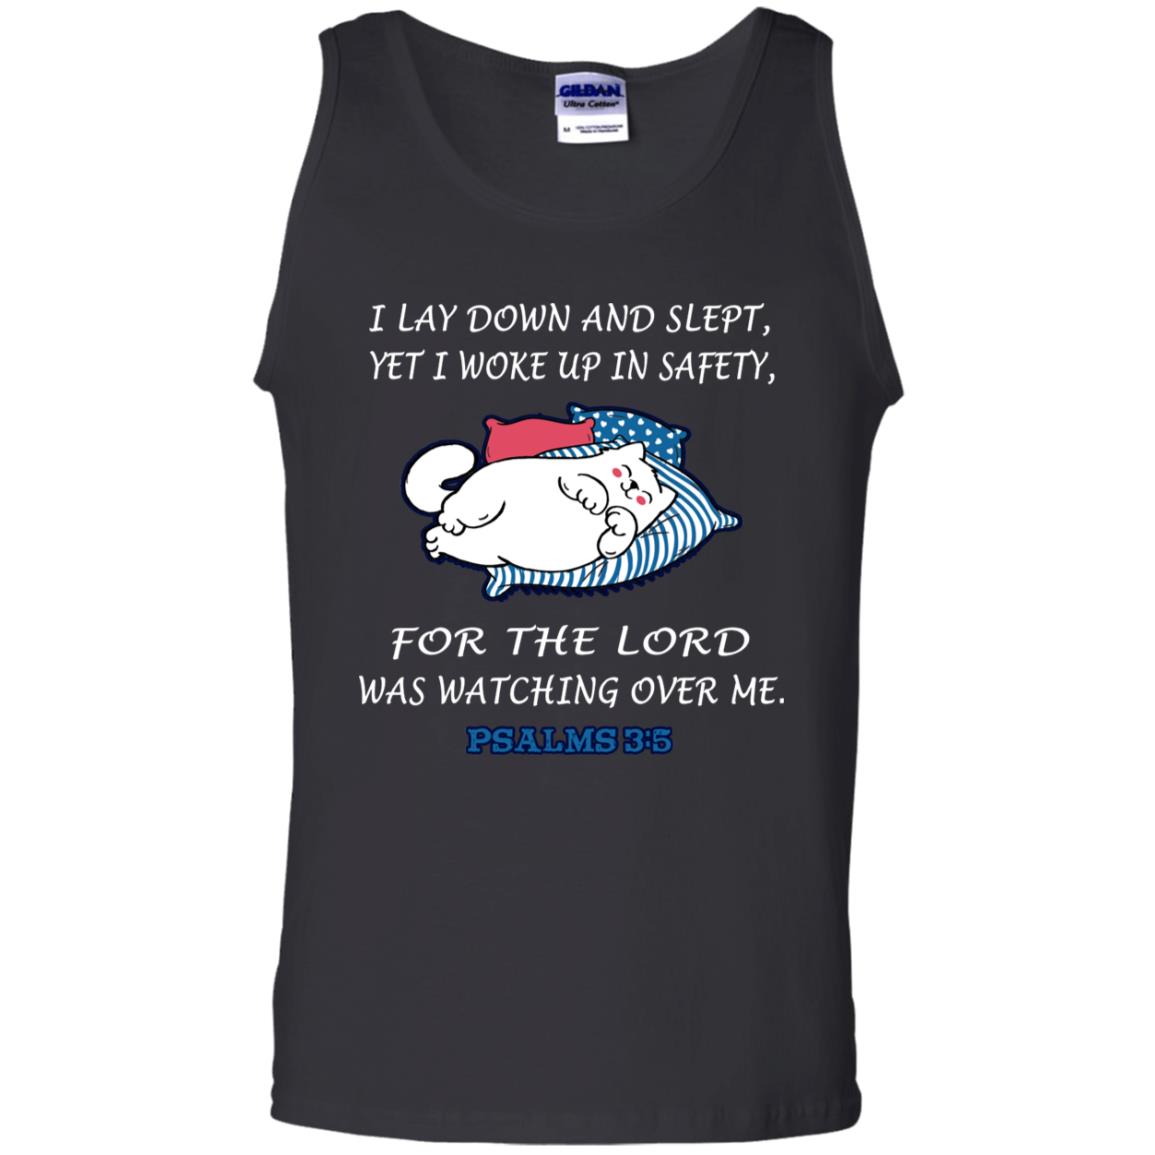 I Lay Down And Slept Yet I Woke Up In Safety For The Lord Was Watching Over Me ShirtG220 Gildan 100% Cotton Tank Top